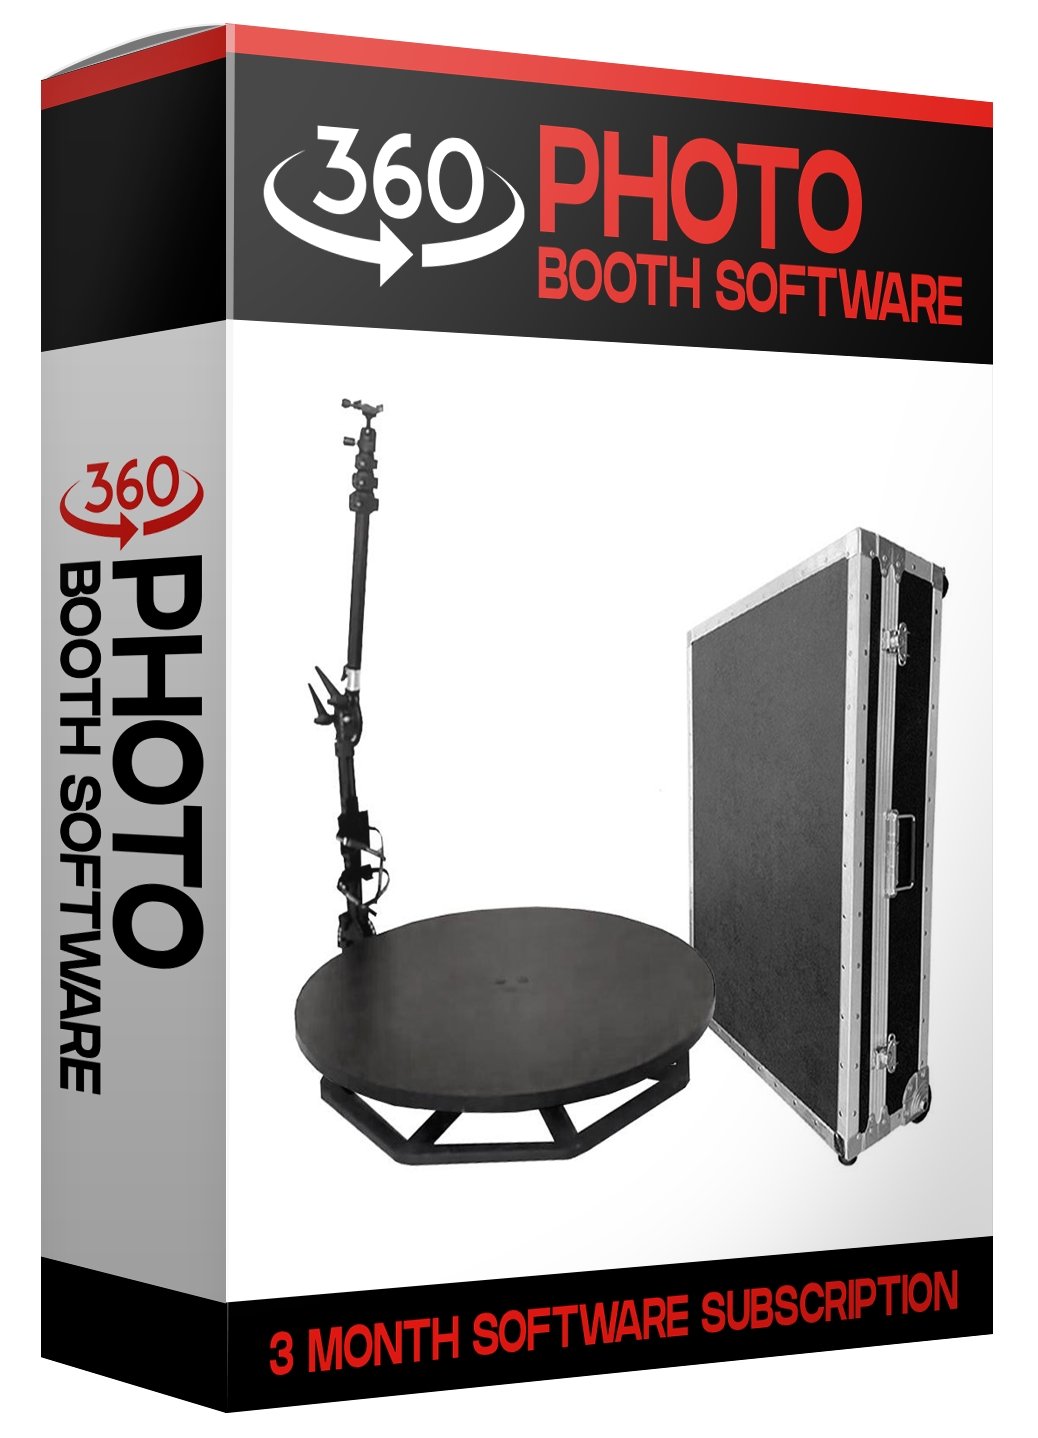 RevoSpin RM-4 Round 360 Photo Booth Deluxe Package (MANUAL SPIN) - VS Booths 360